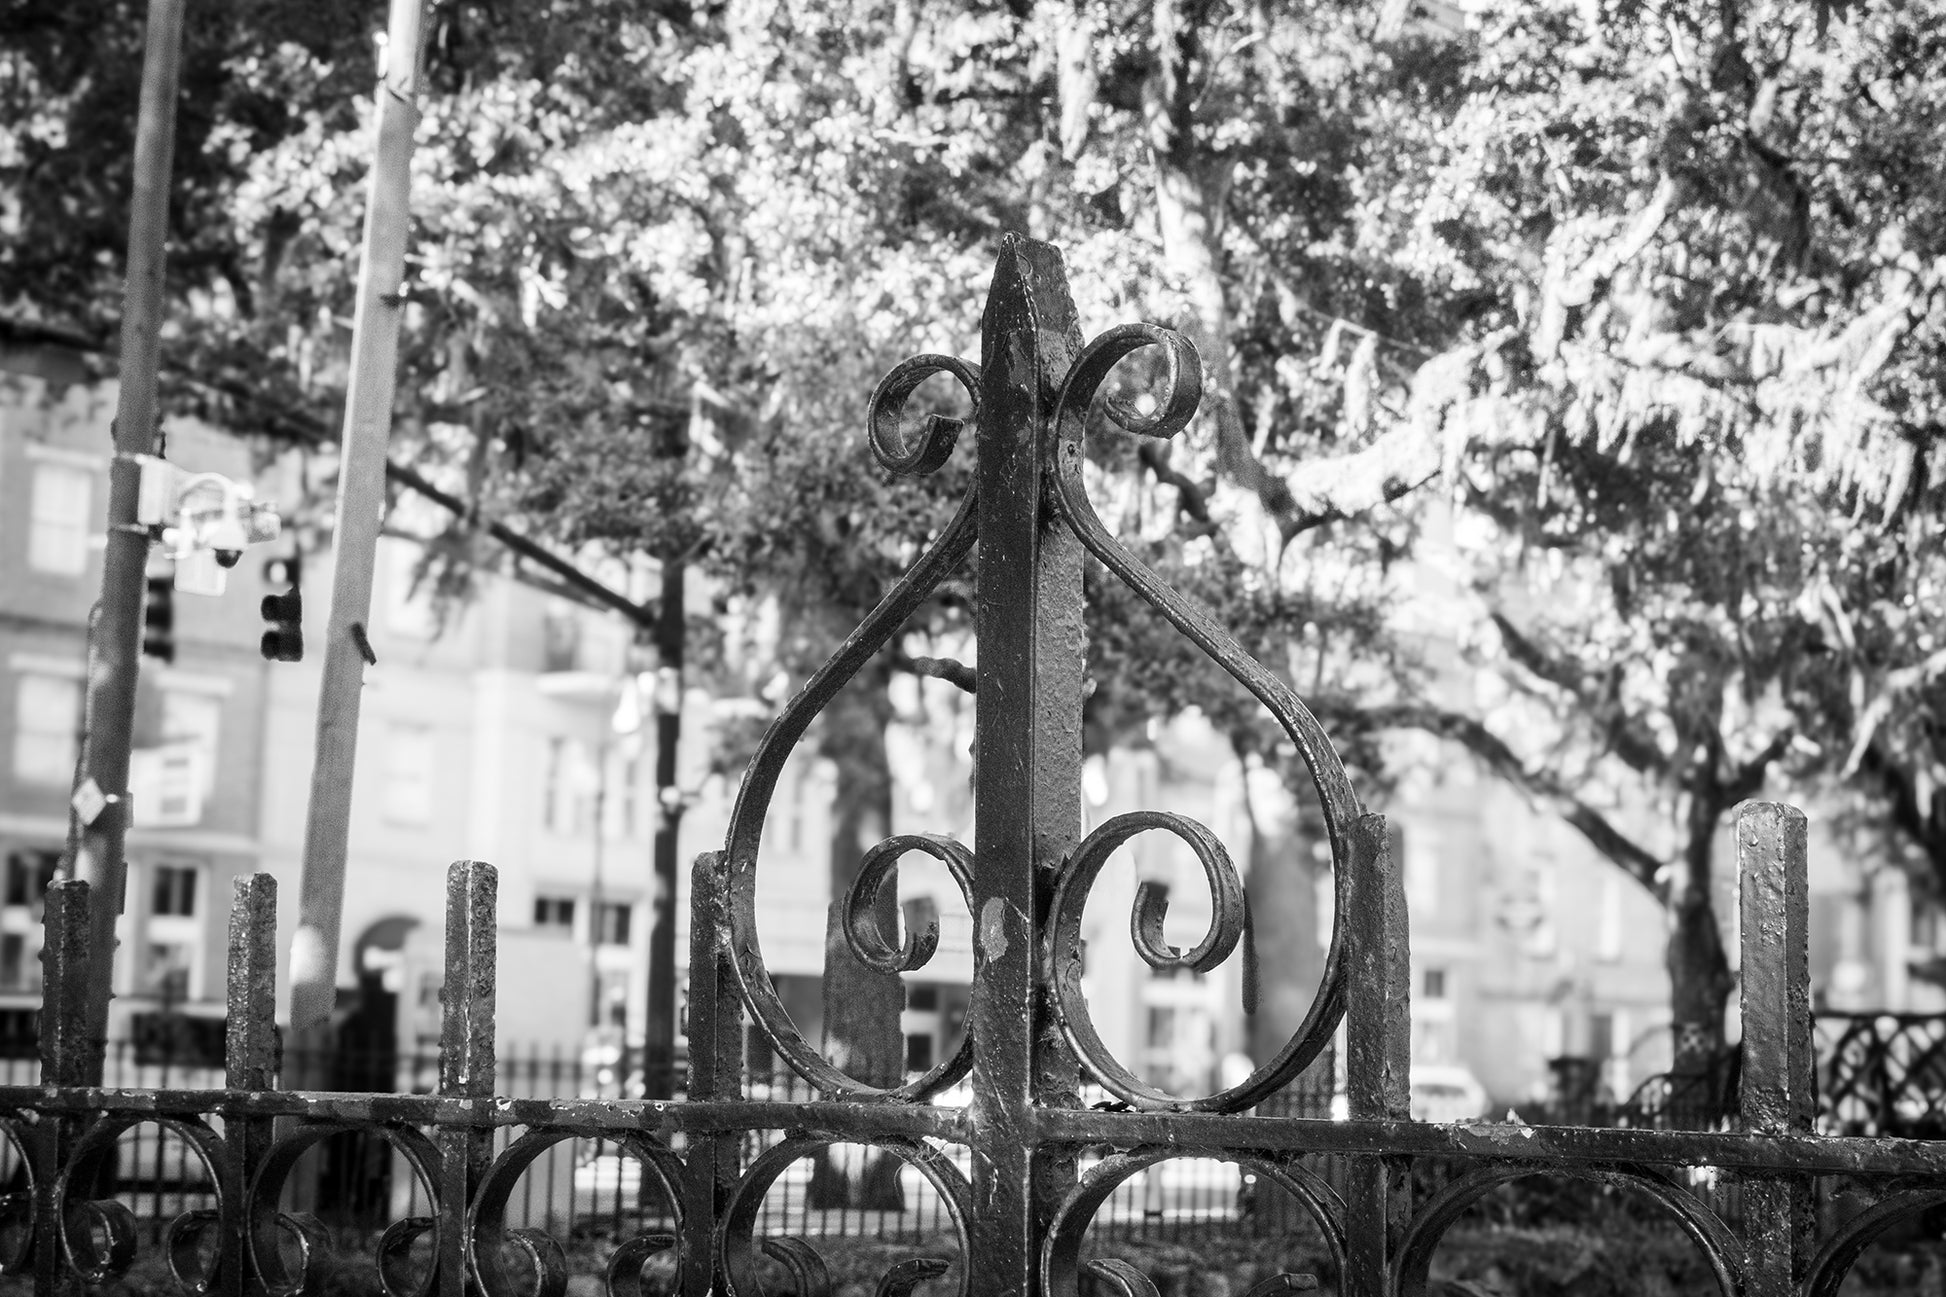 Architectural / Industrial / Cityscape Abstract Decor Old Wrought Iron Fence Gate Savannah Ga 2 Loose Wall Art Print 